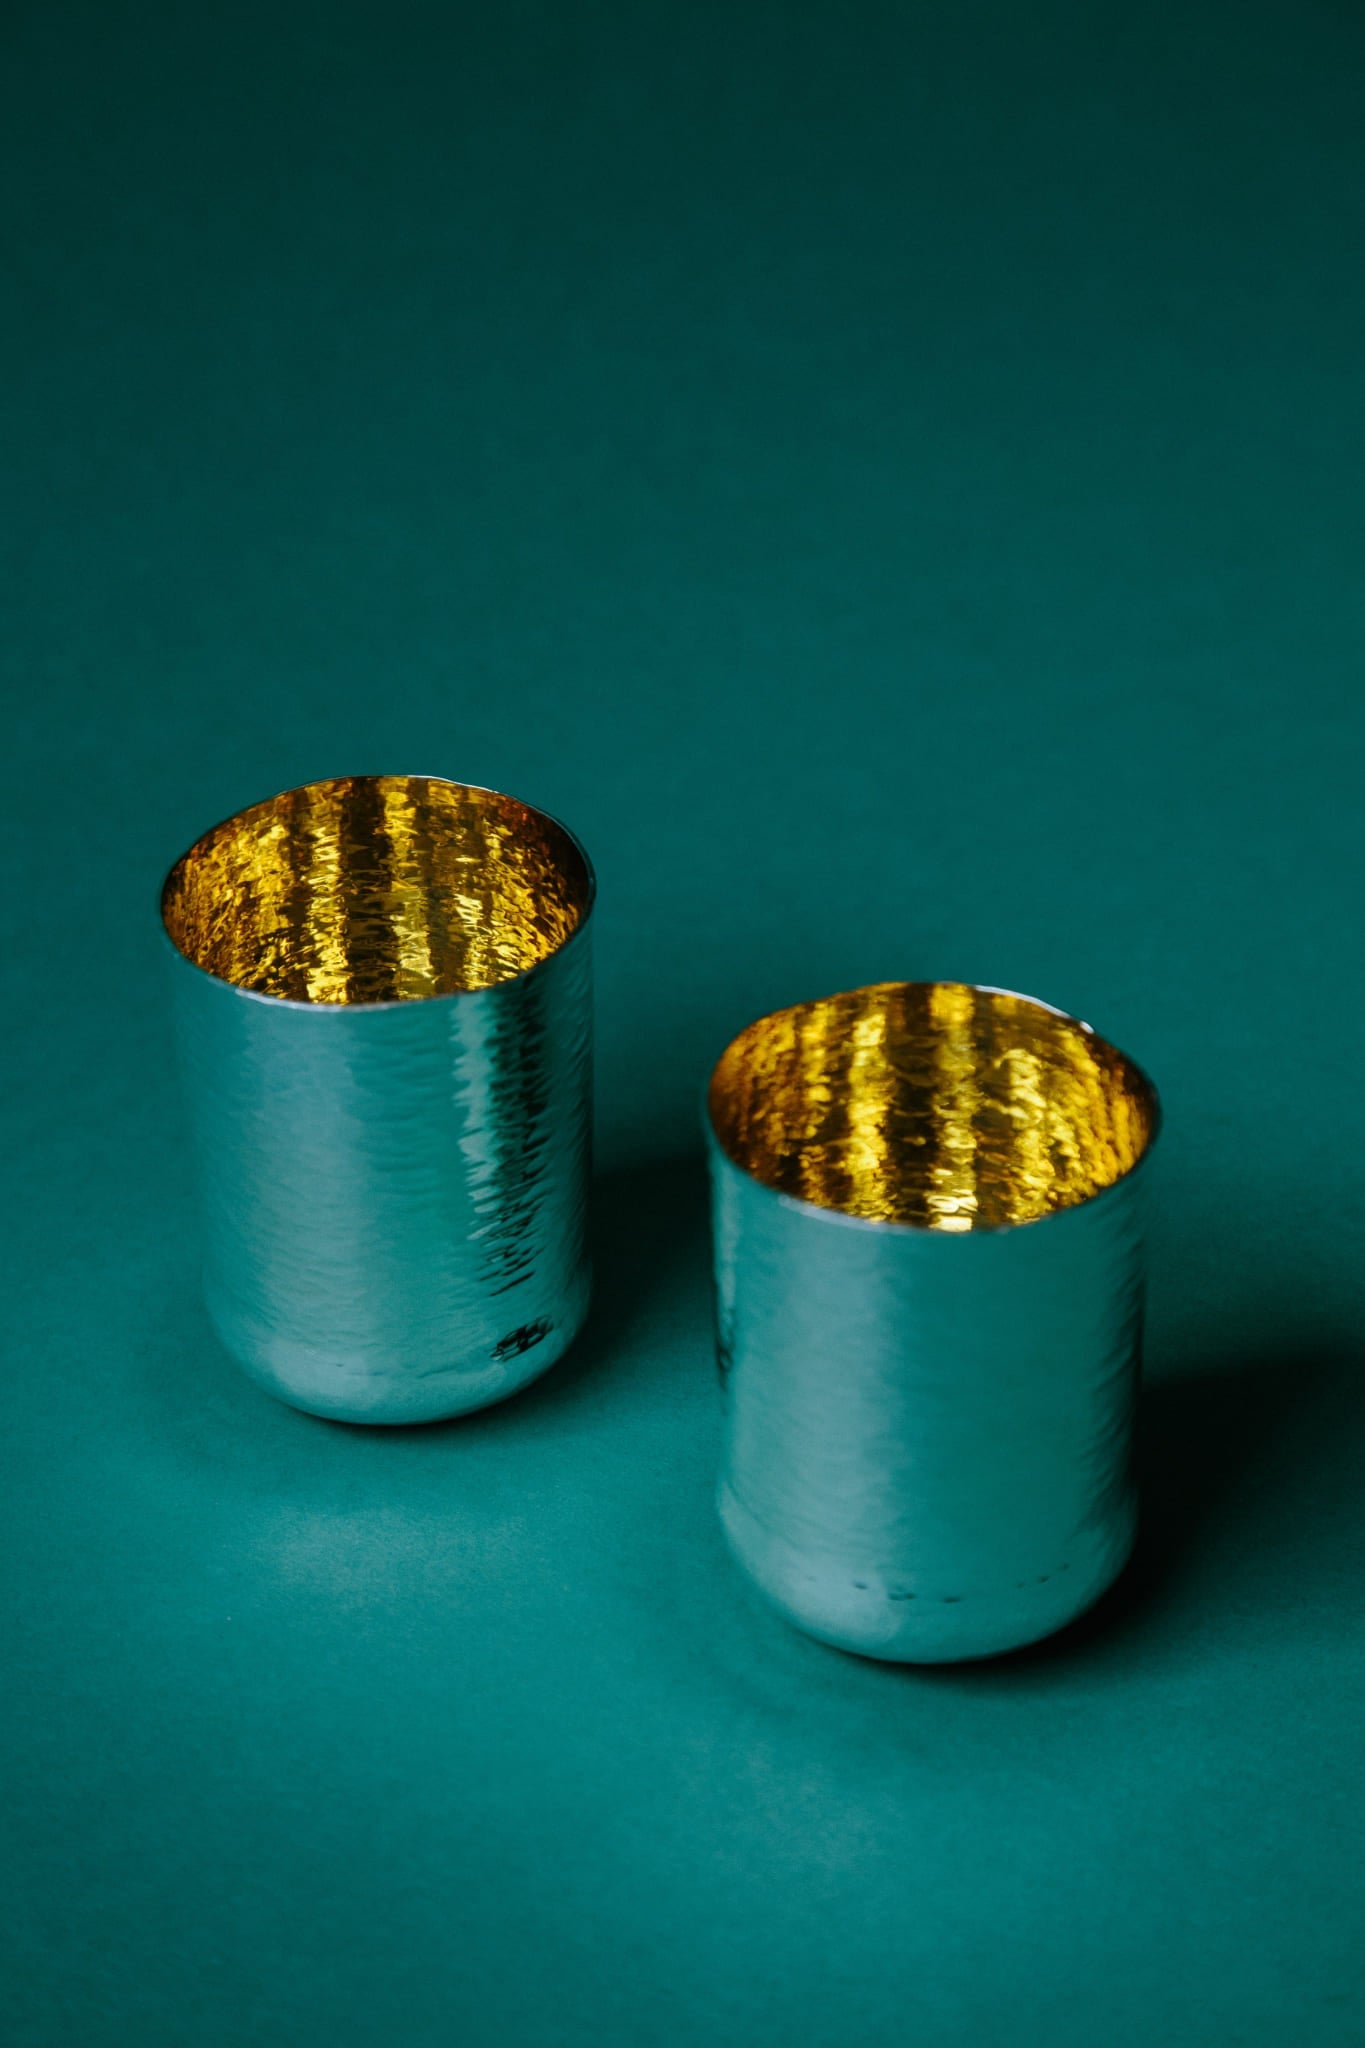 A pair of hand-raised sterling silver cups with gold-plated inner surfaces. Highly reflective inner surface, contrasting against a deep green paper backdrop. 